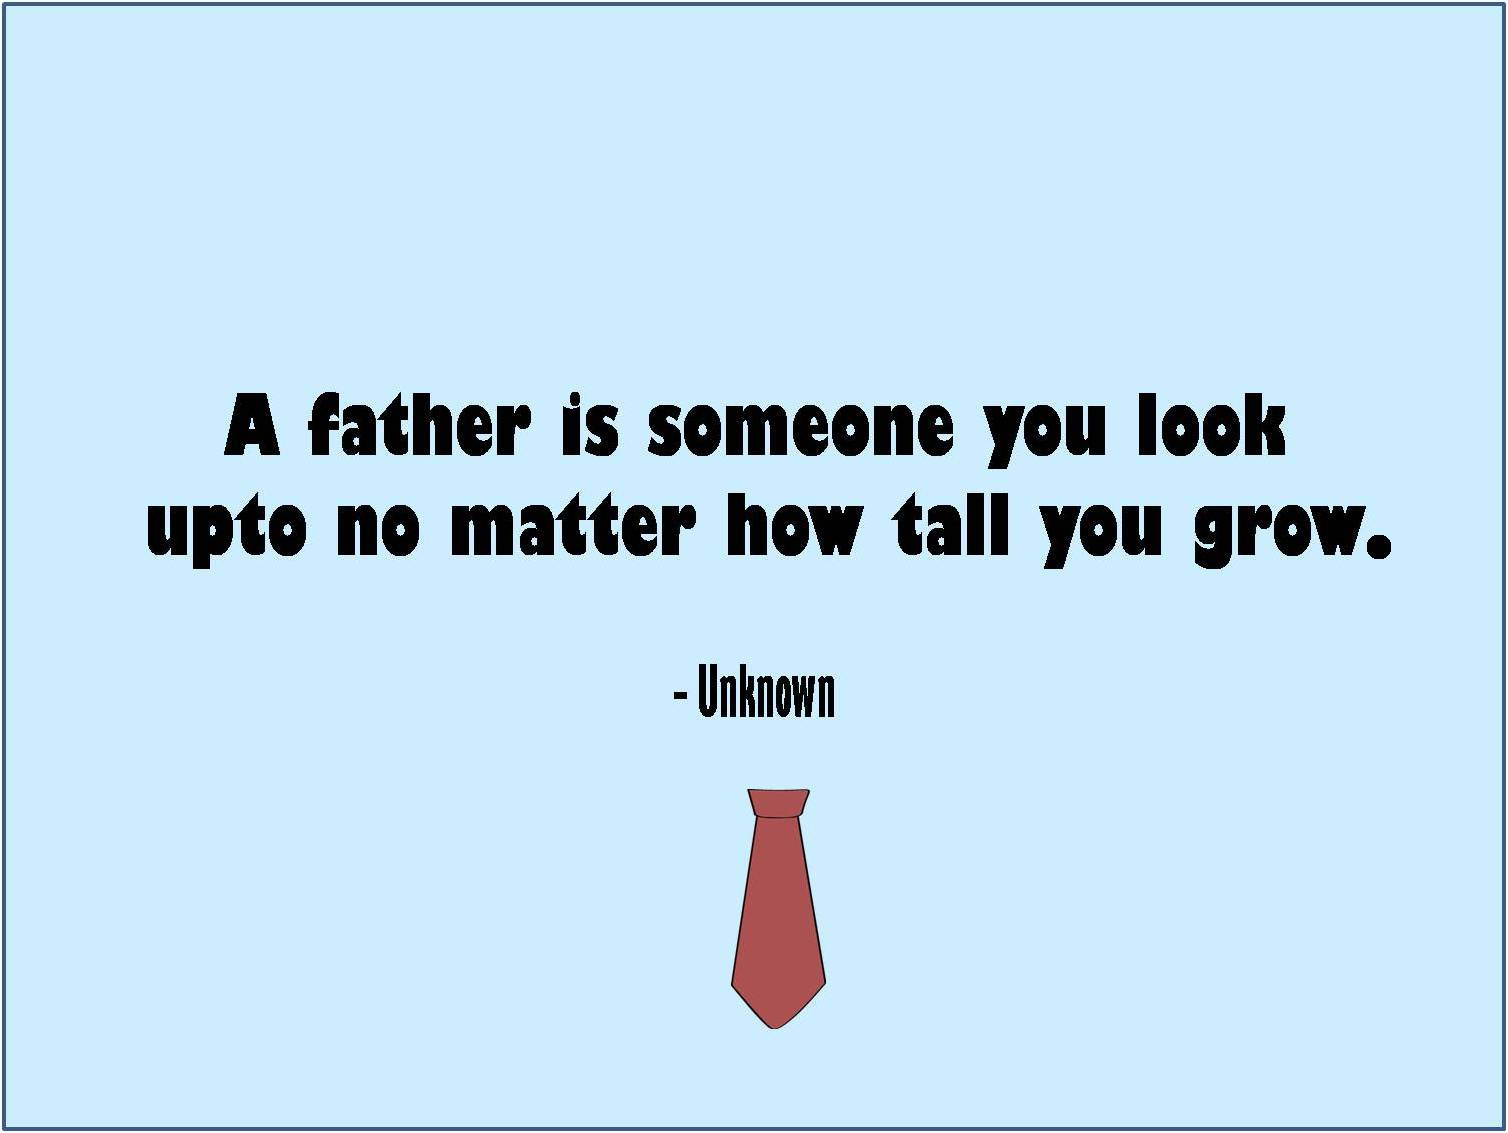 Happy Fathers Day Pics And Quotes
 6 Best and inspirational Happy Father’s Day Quotes